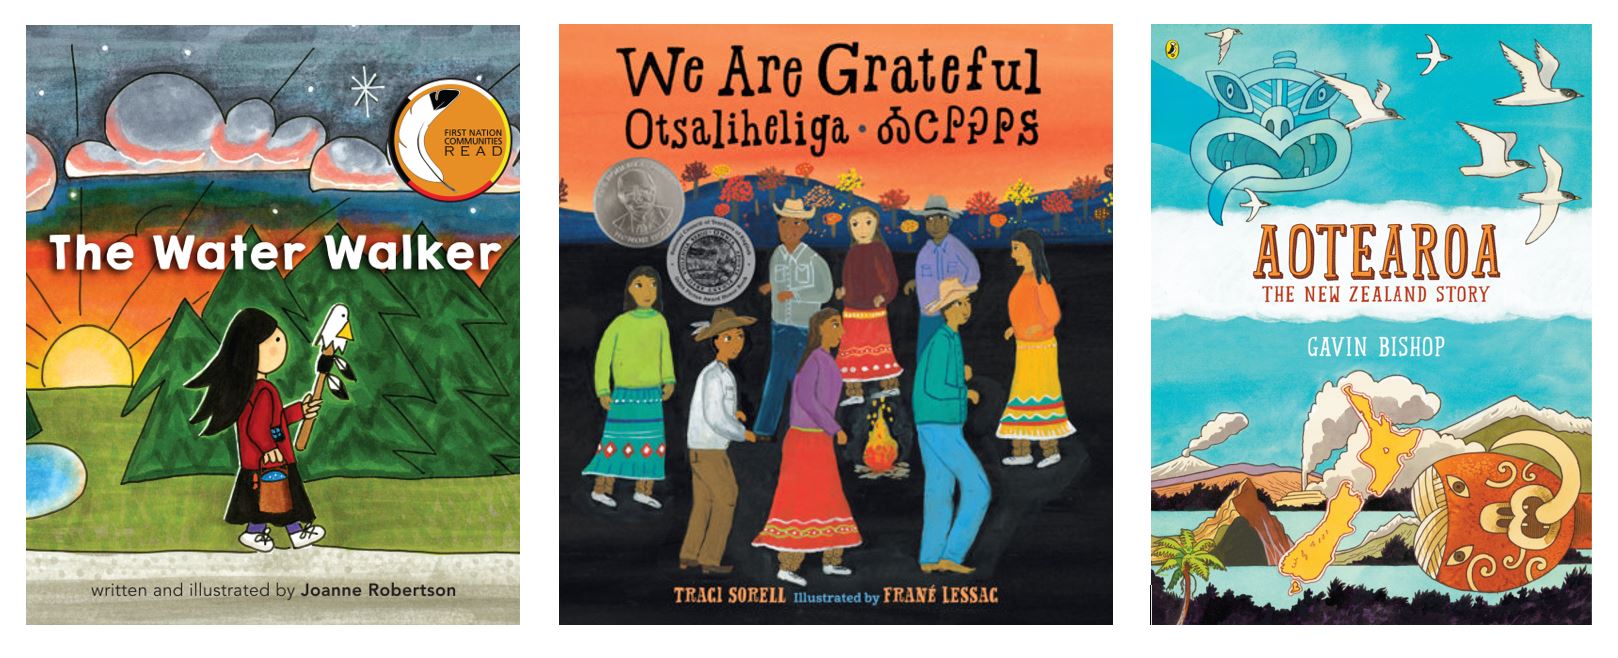 Indigenous Authored Books Listed in the Article